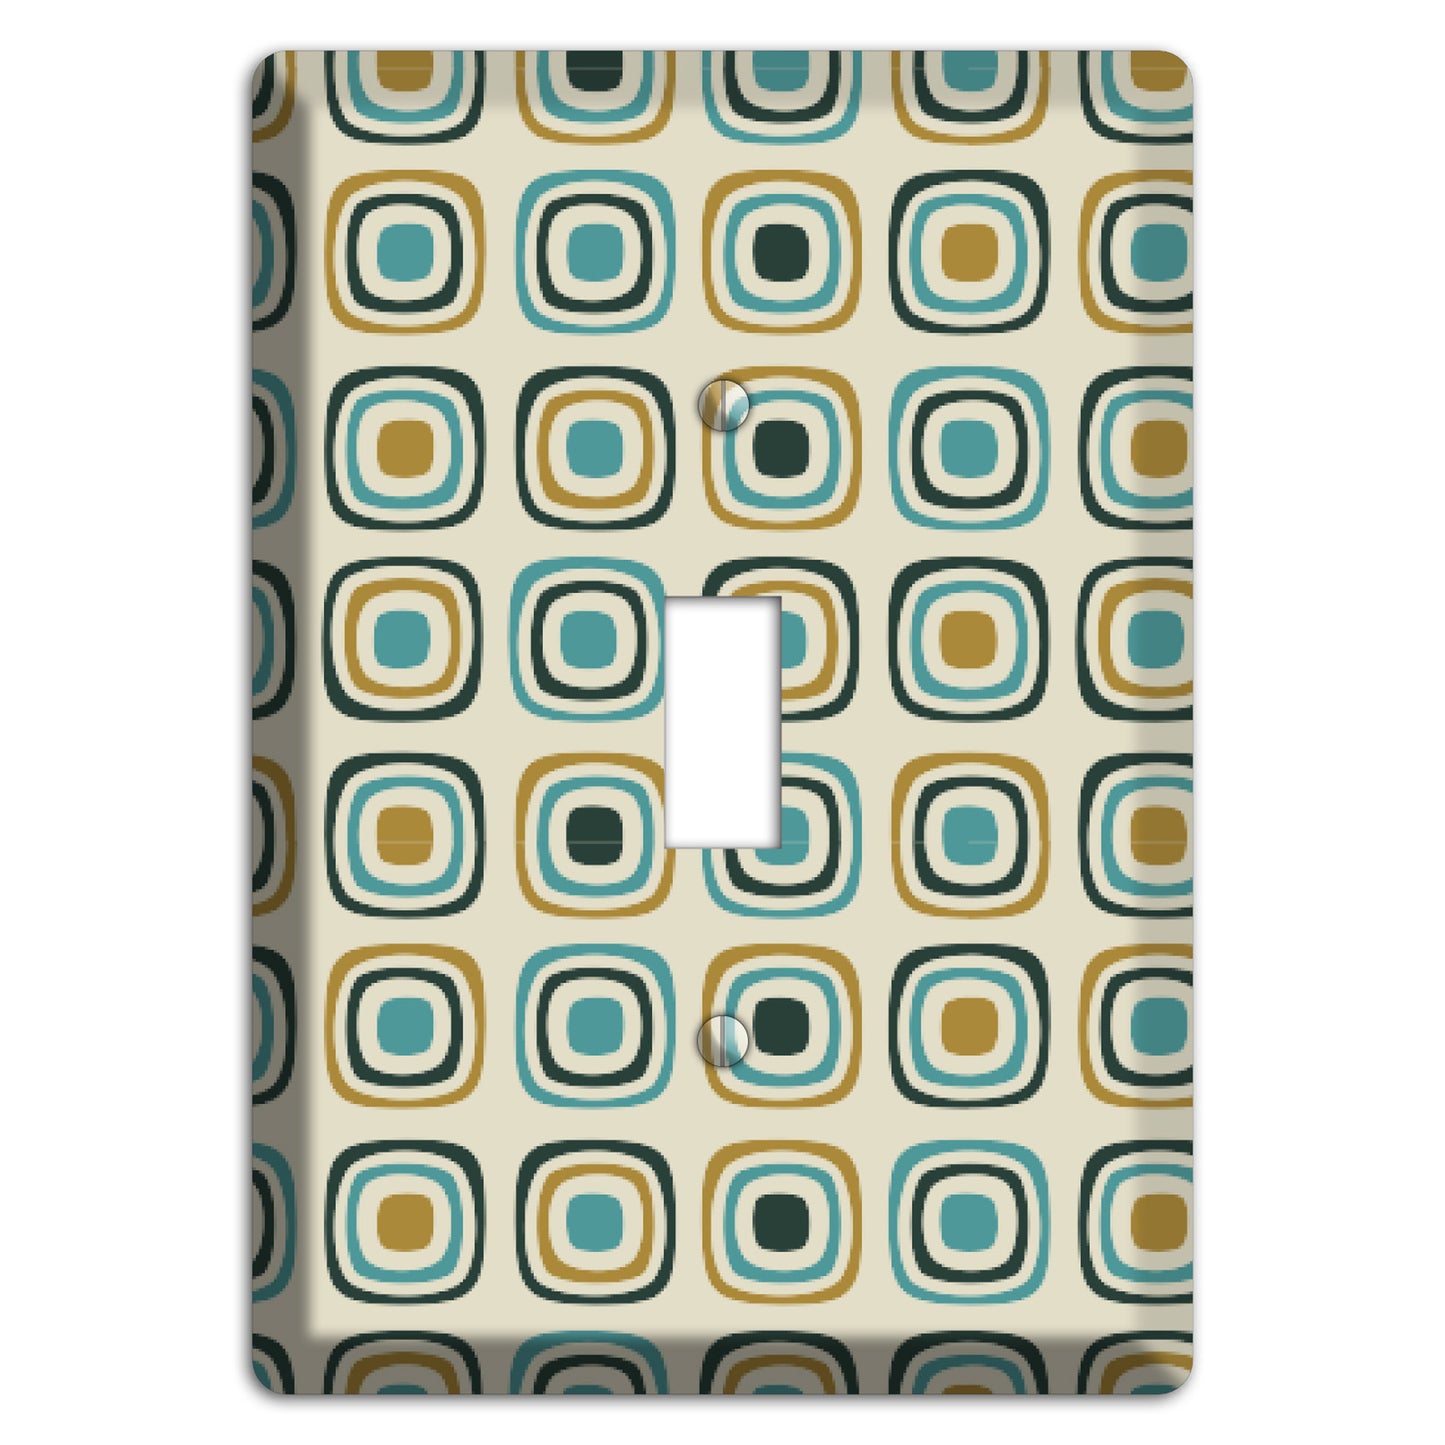 Yellow and Blue Rounded Squares Cover Plates